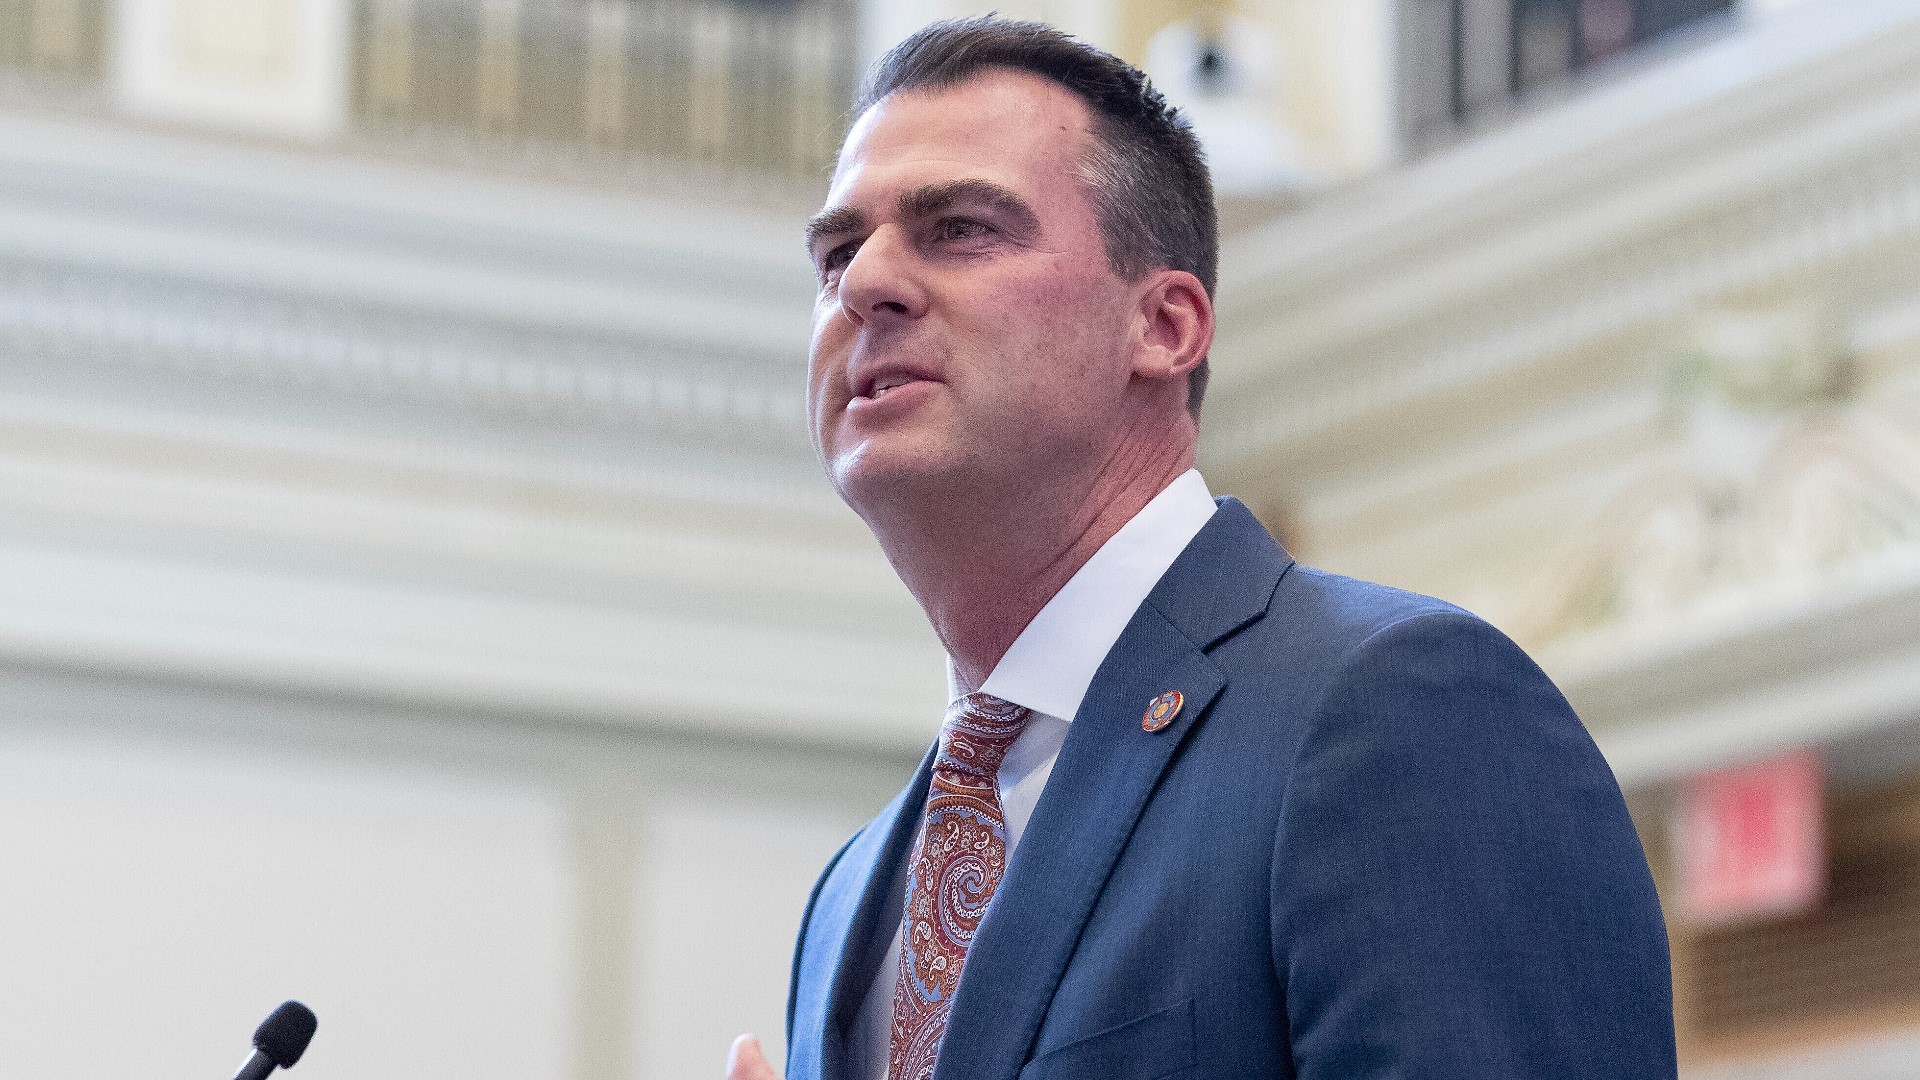 Families along with the ACLU are suing the state of Oklahoma after Governor Stitt signed legislation banning gender affirming healthcare.